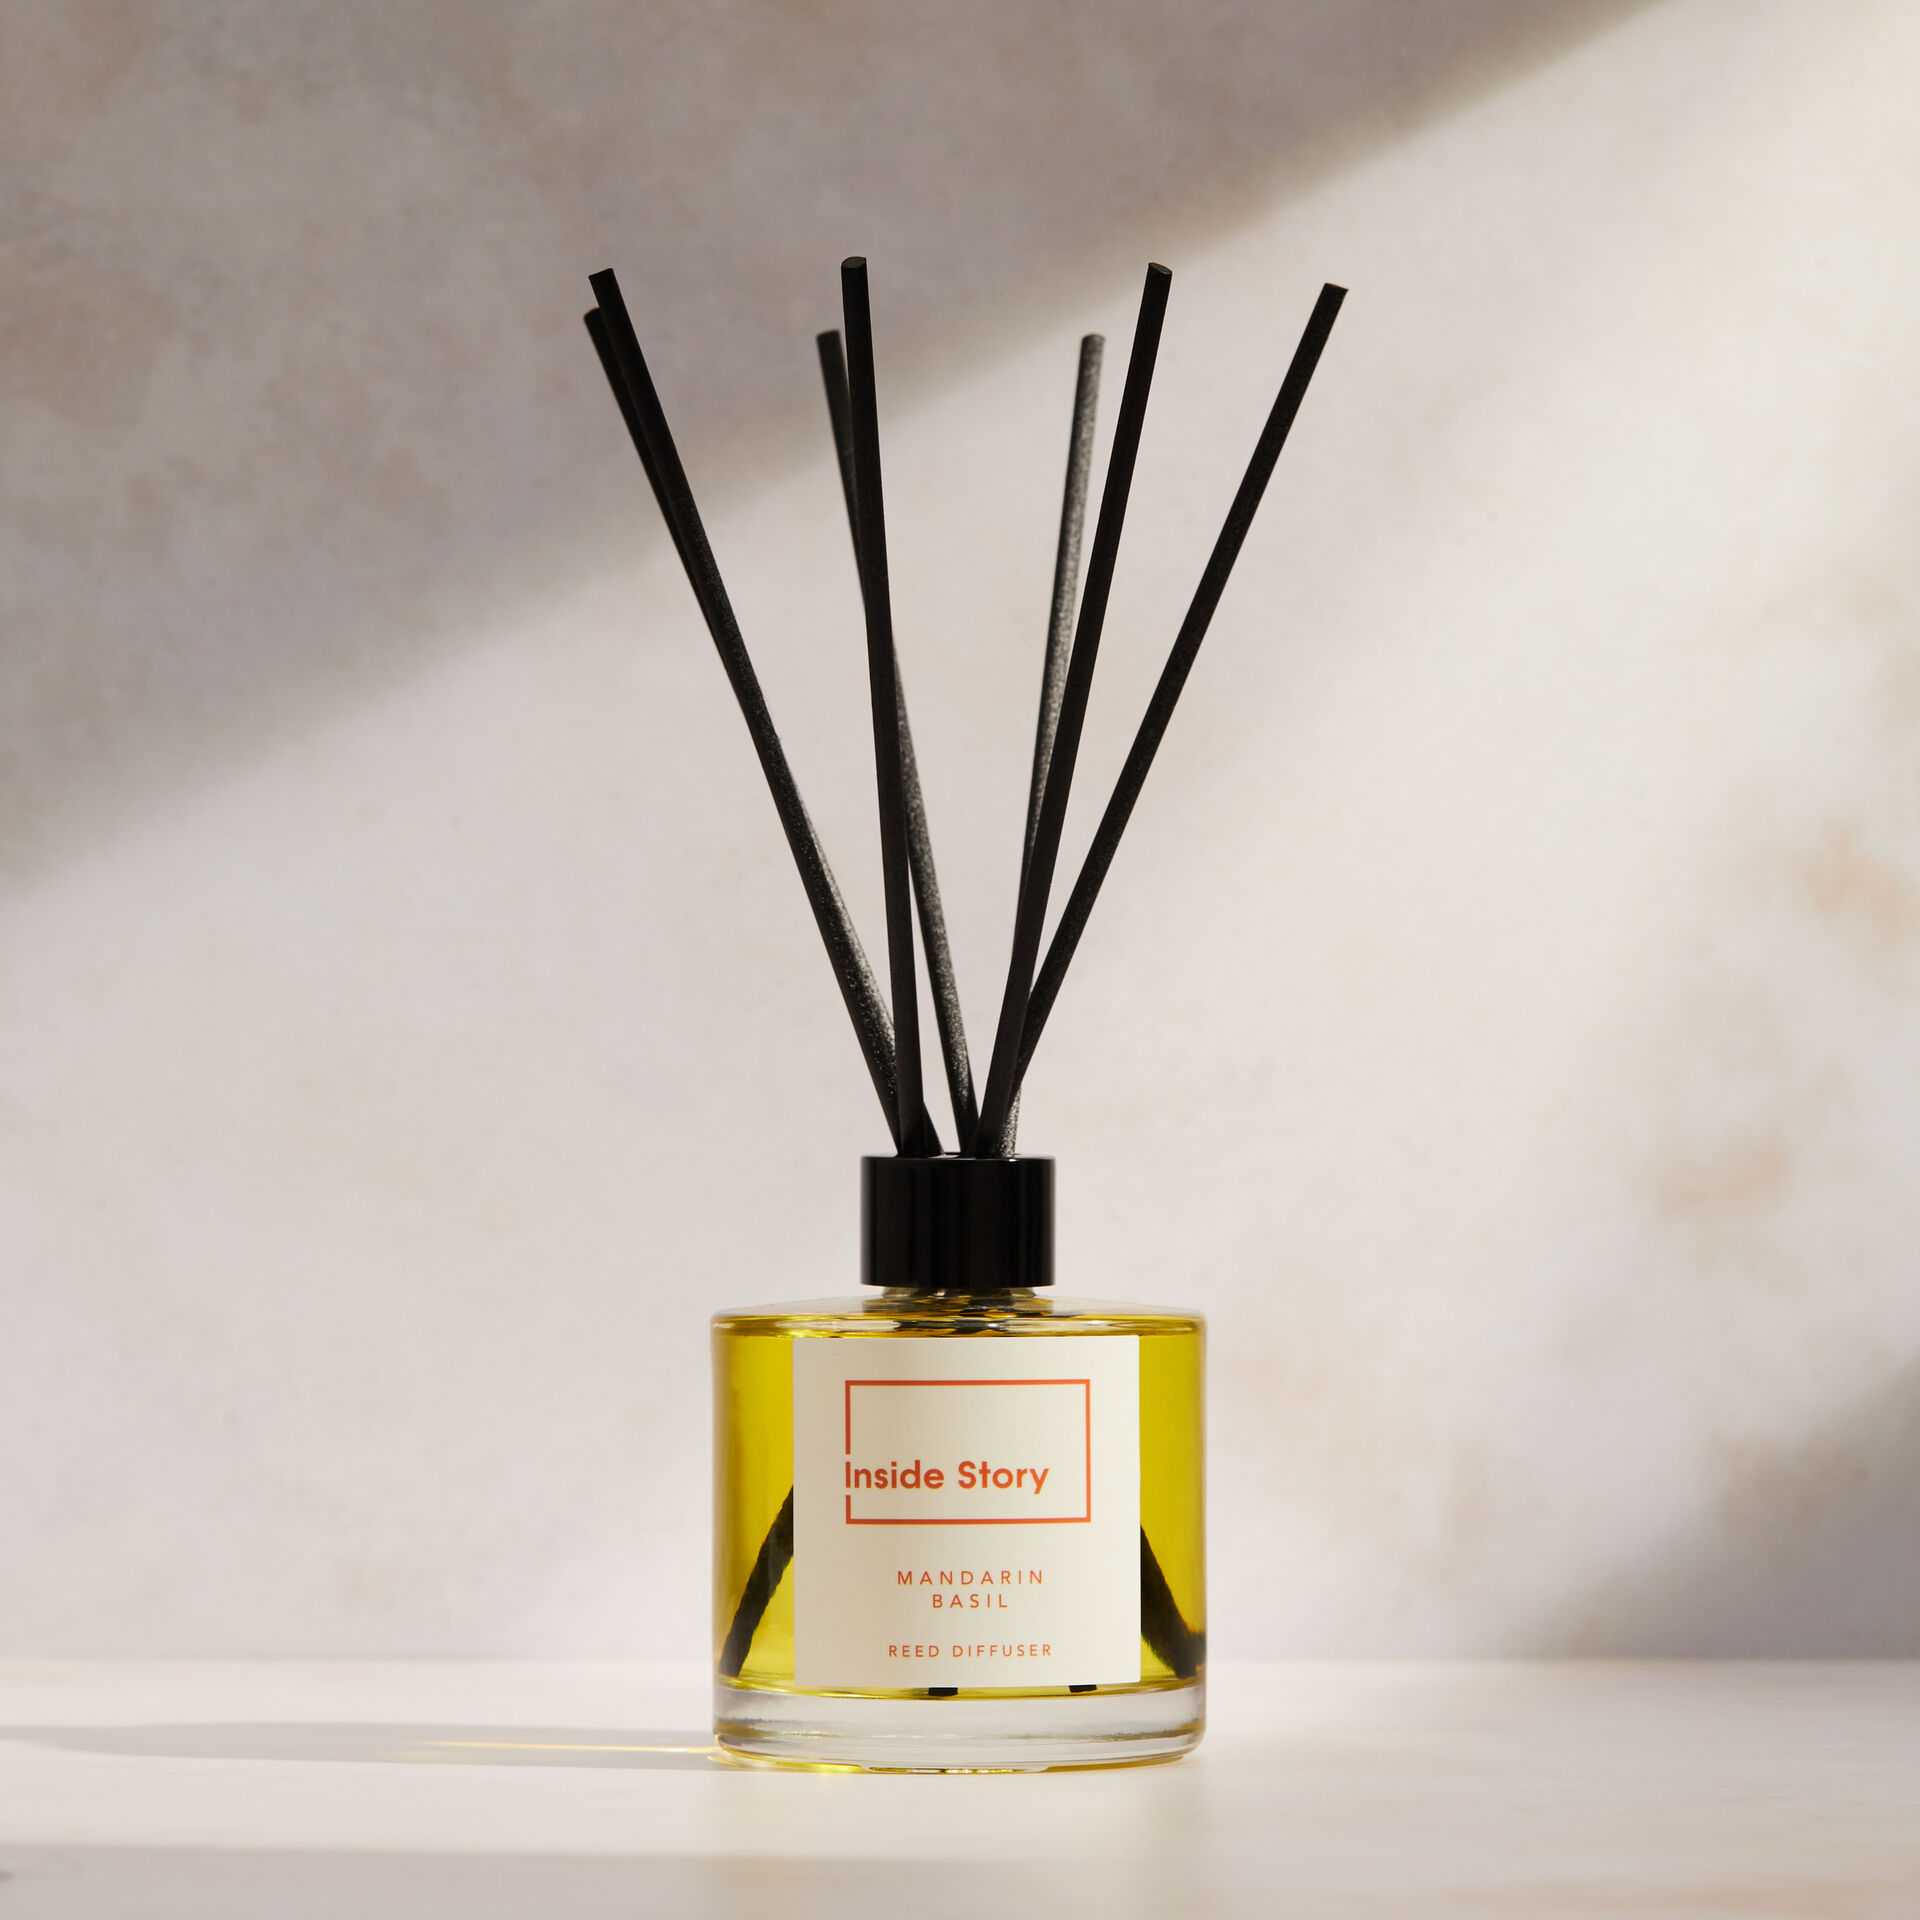 ${product-id}-Mandarin And Basil Diffuser-Neutral-${view-type}